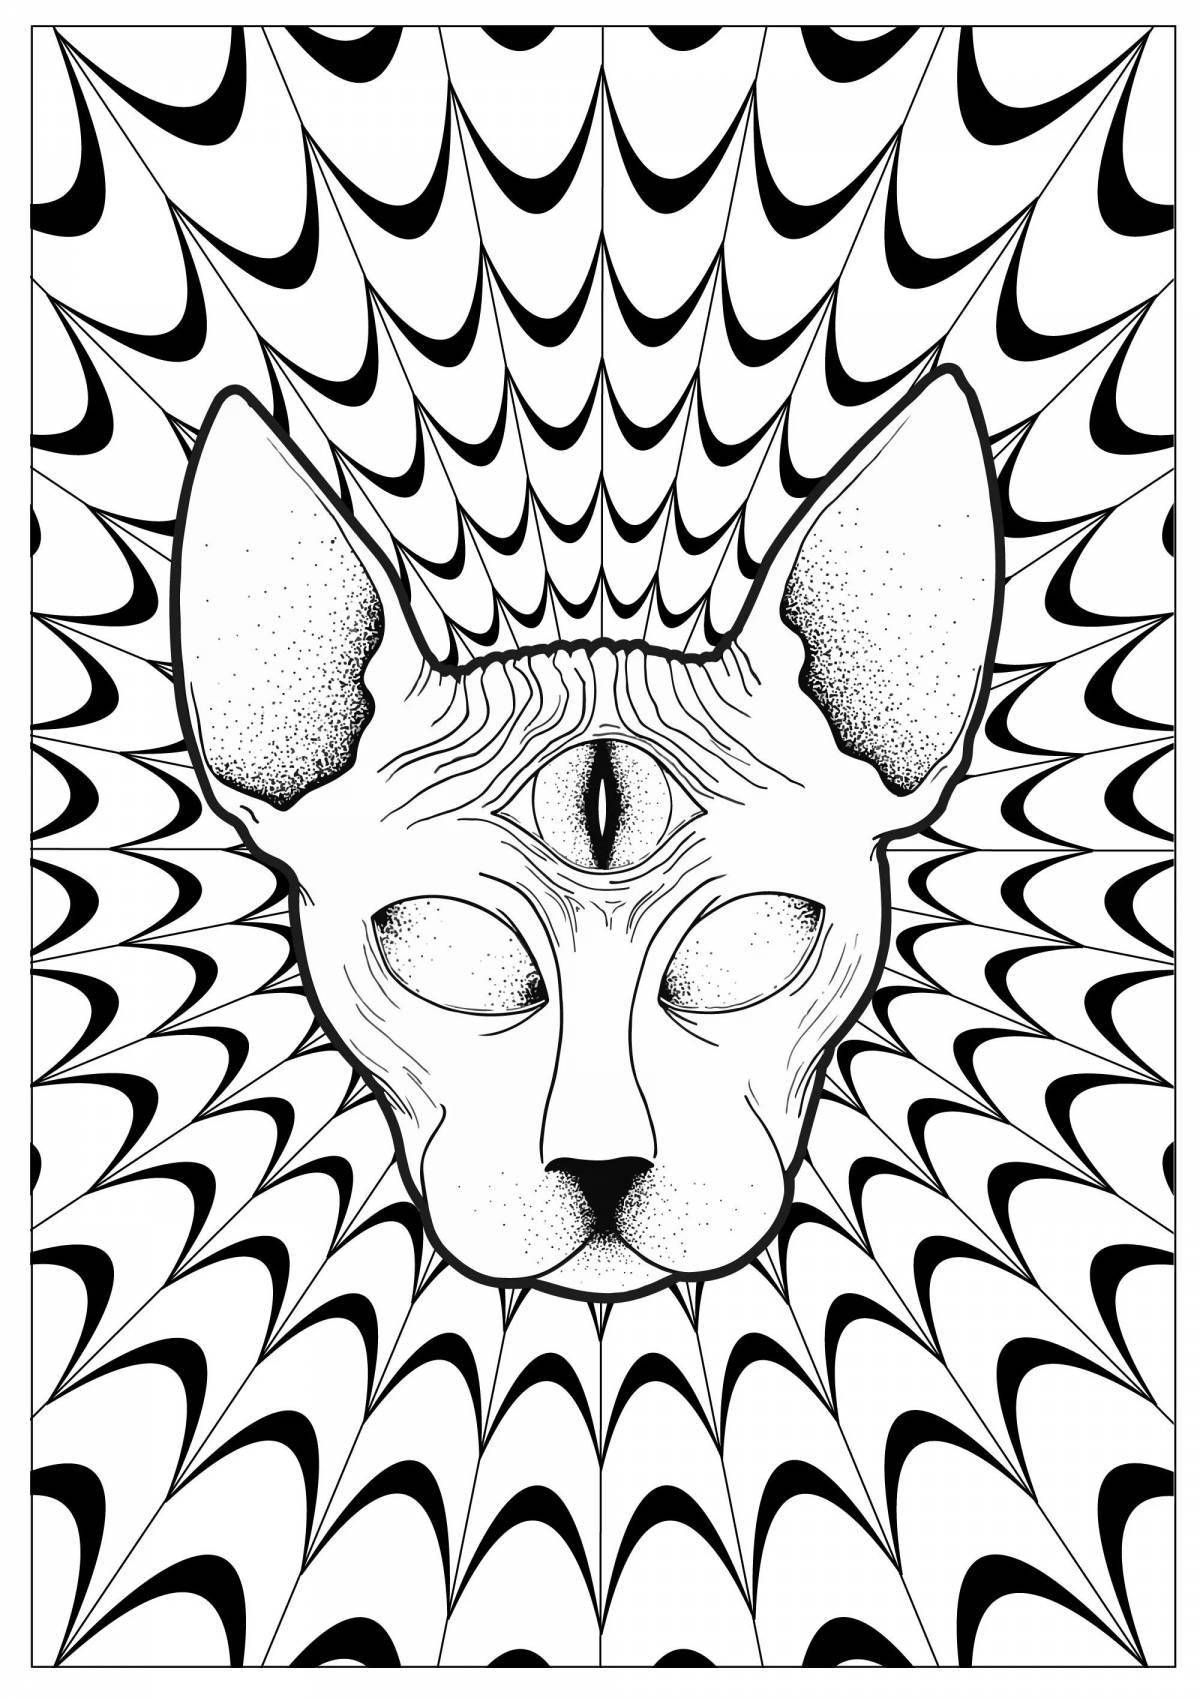 Surreal psychedelic coloring book